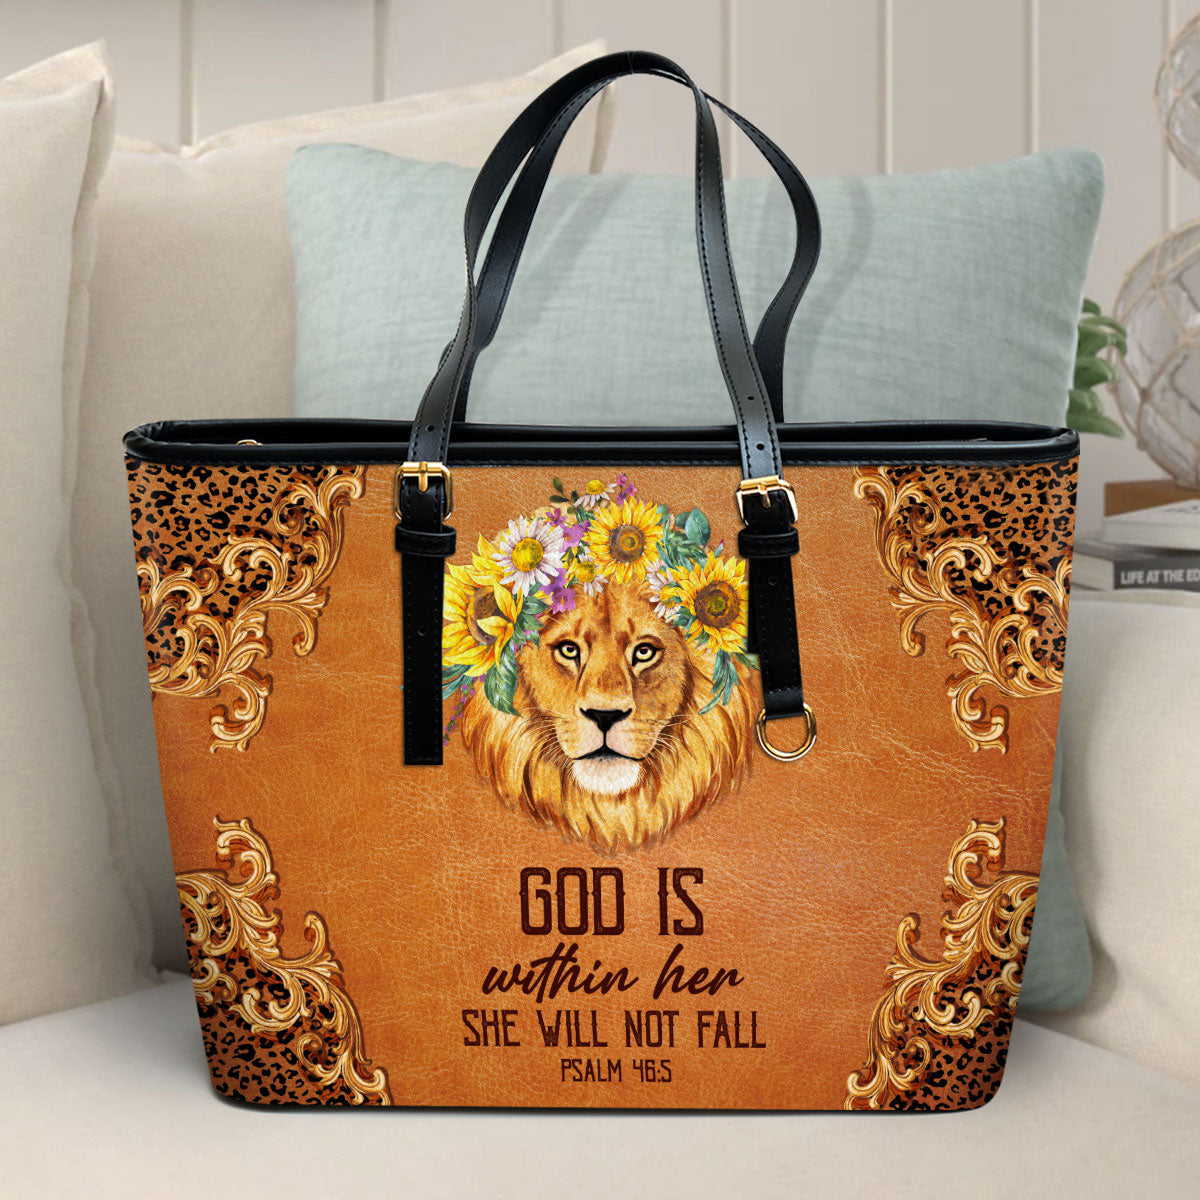 God Is Within Her She Will Not Fall Large Leather Tote Bag - Christ Gifts For Religious Women - Best Mother's Day Gifts